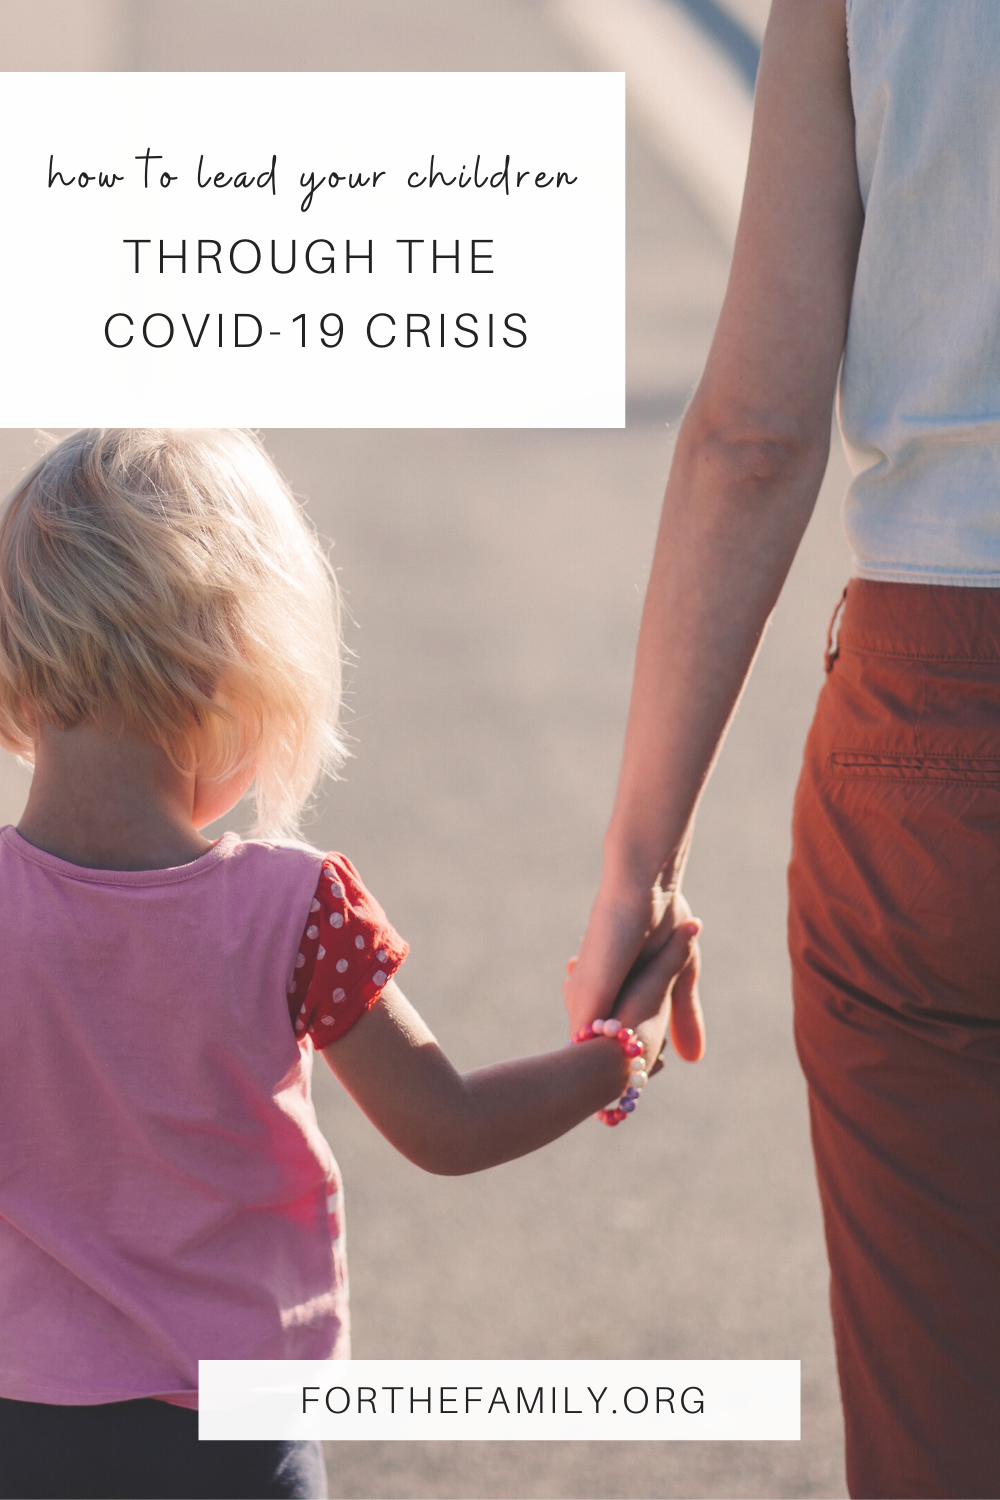 How to Lead Your Children Through the COVID-19 Crisis